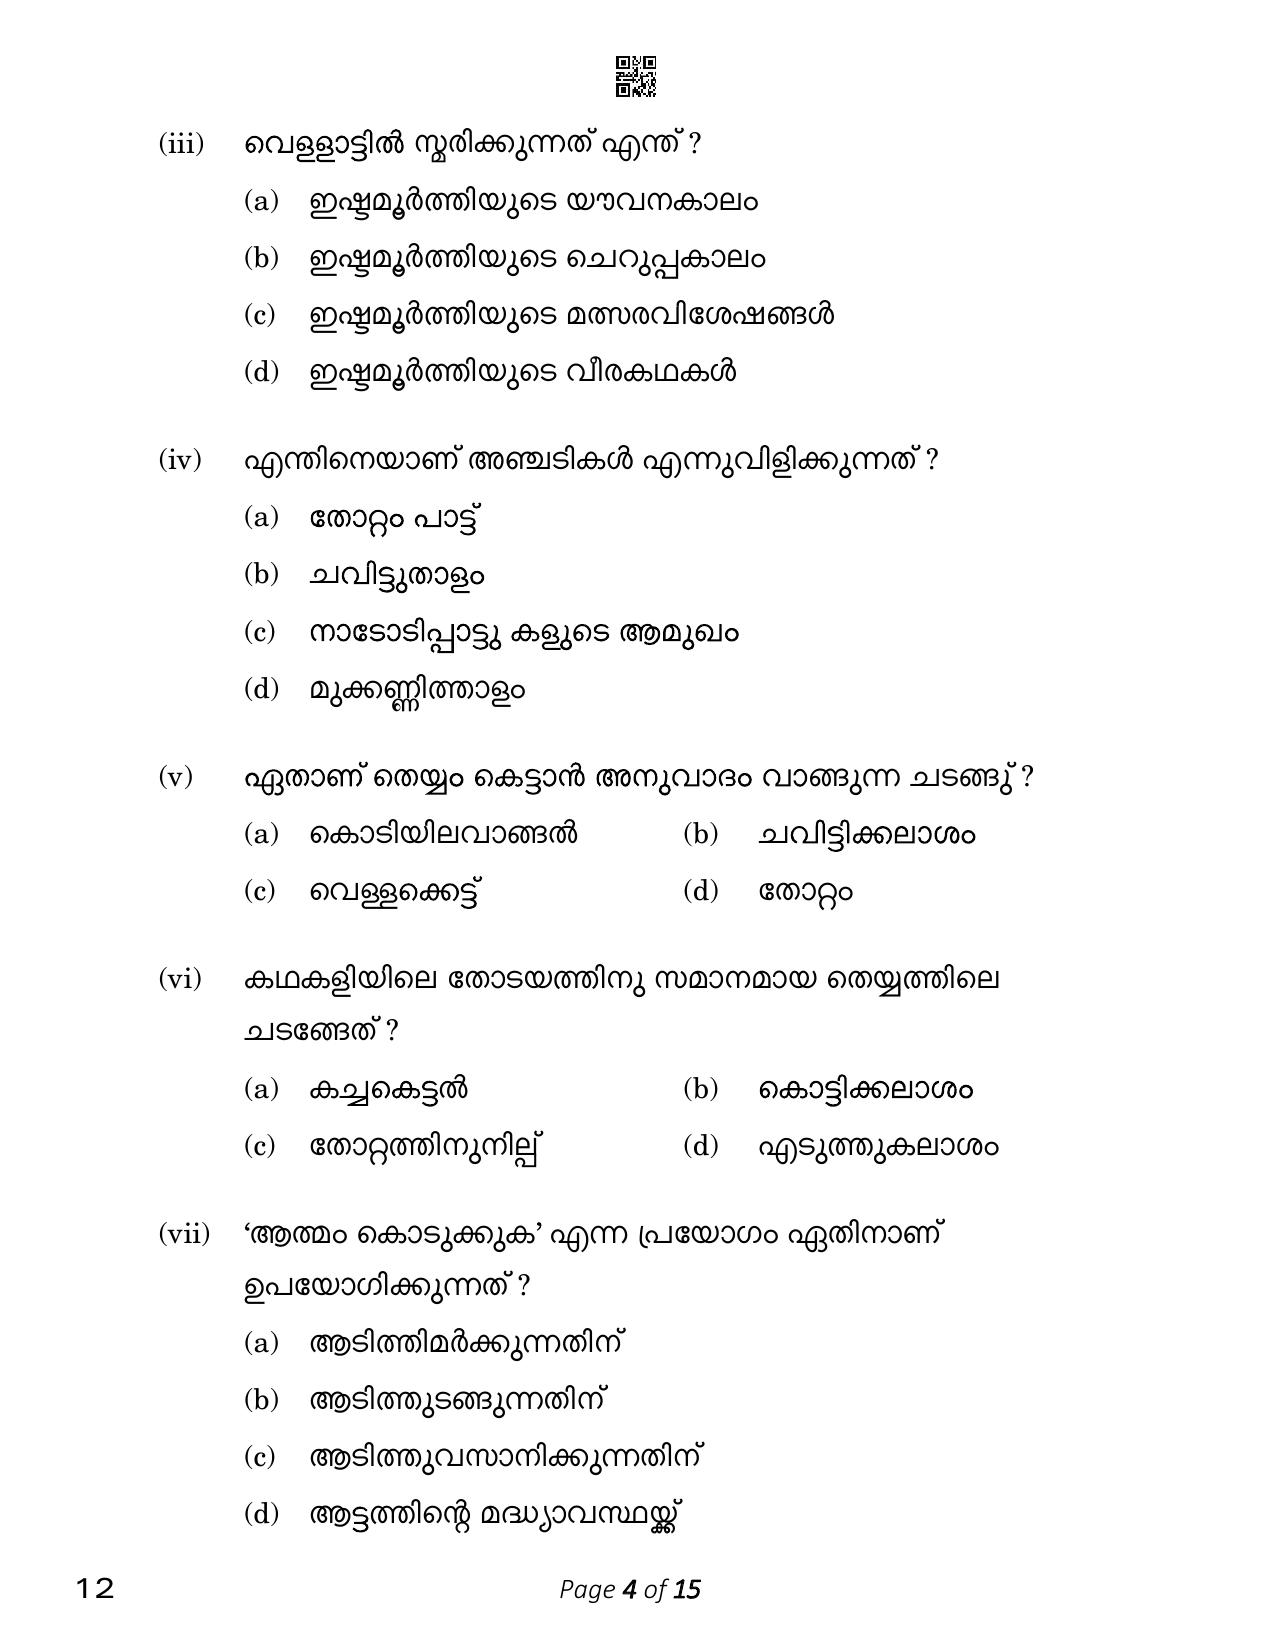 CBSE Class 12 Malayalam (Compartment) 2023 Question Paper - Page 4